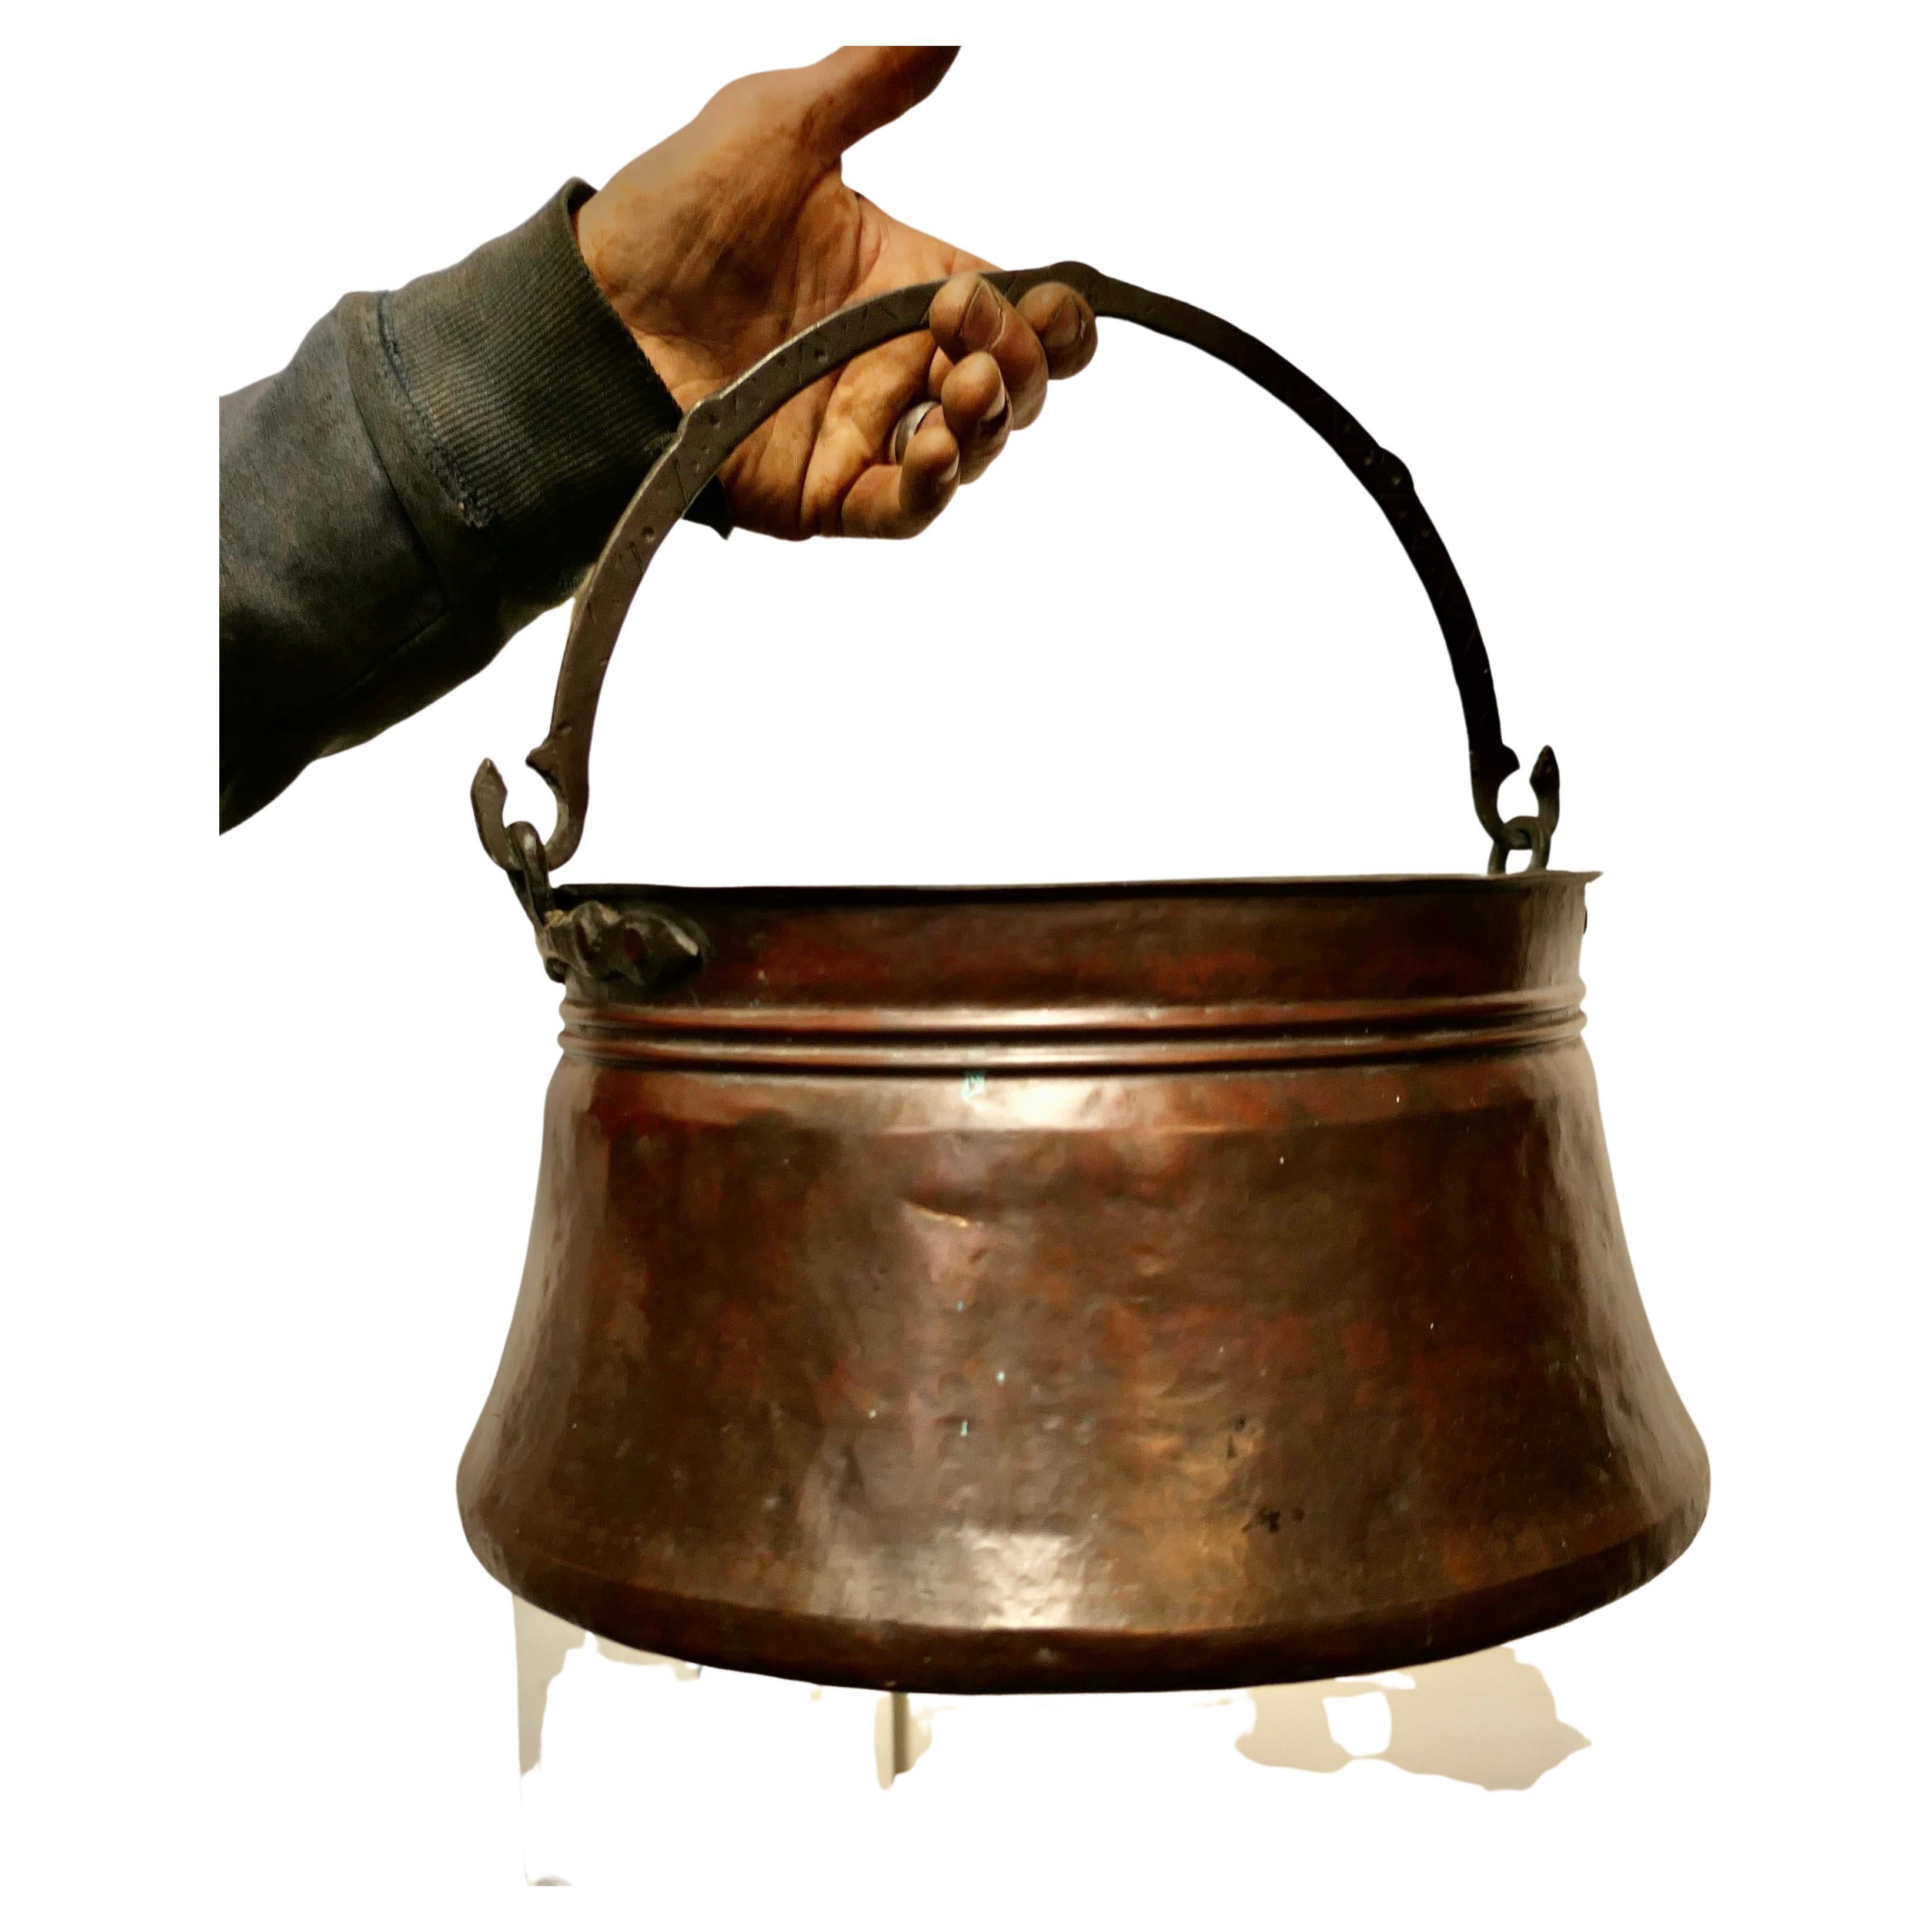 19th century copper cooking pot, Cauldron 

This is a lovely early cooking pot, it has been made in hand beaten copper The pot is wider at the base and has a rolled top, the Iron handle swings through 180 degrees and has a very primitive engraved